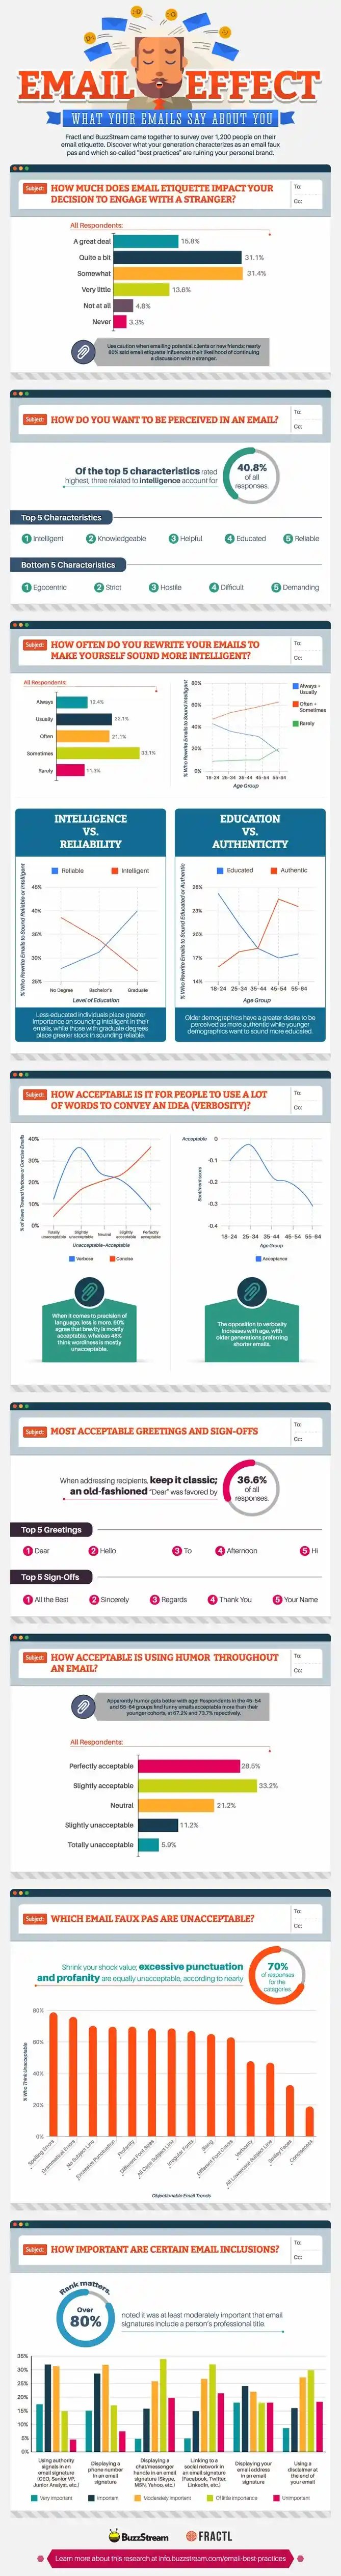 email_stats infographic